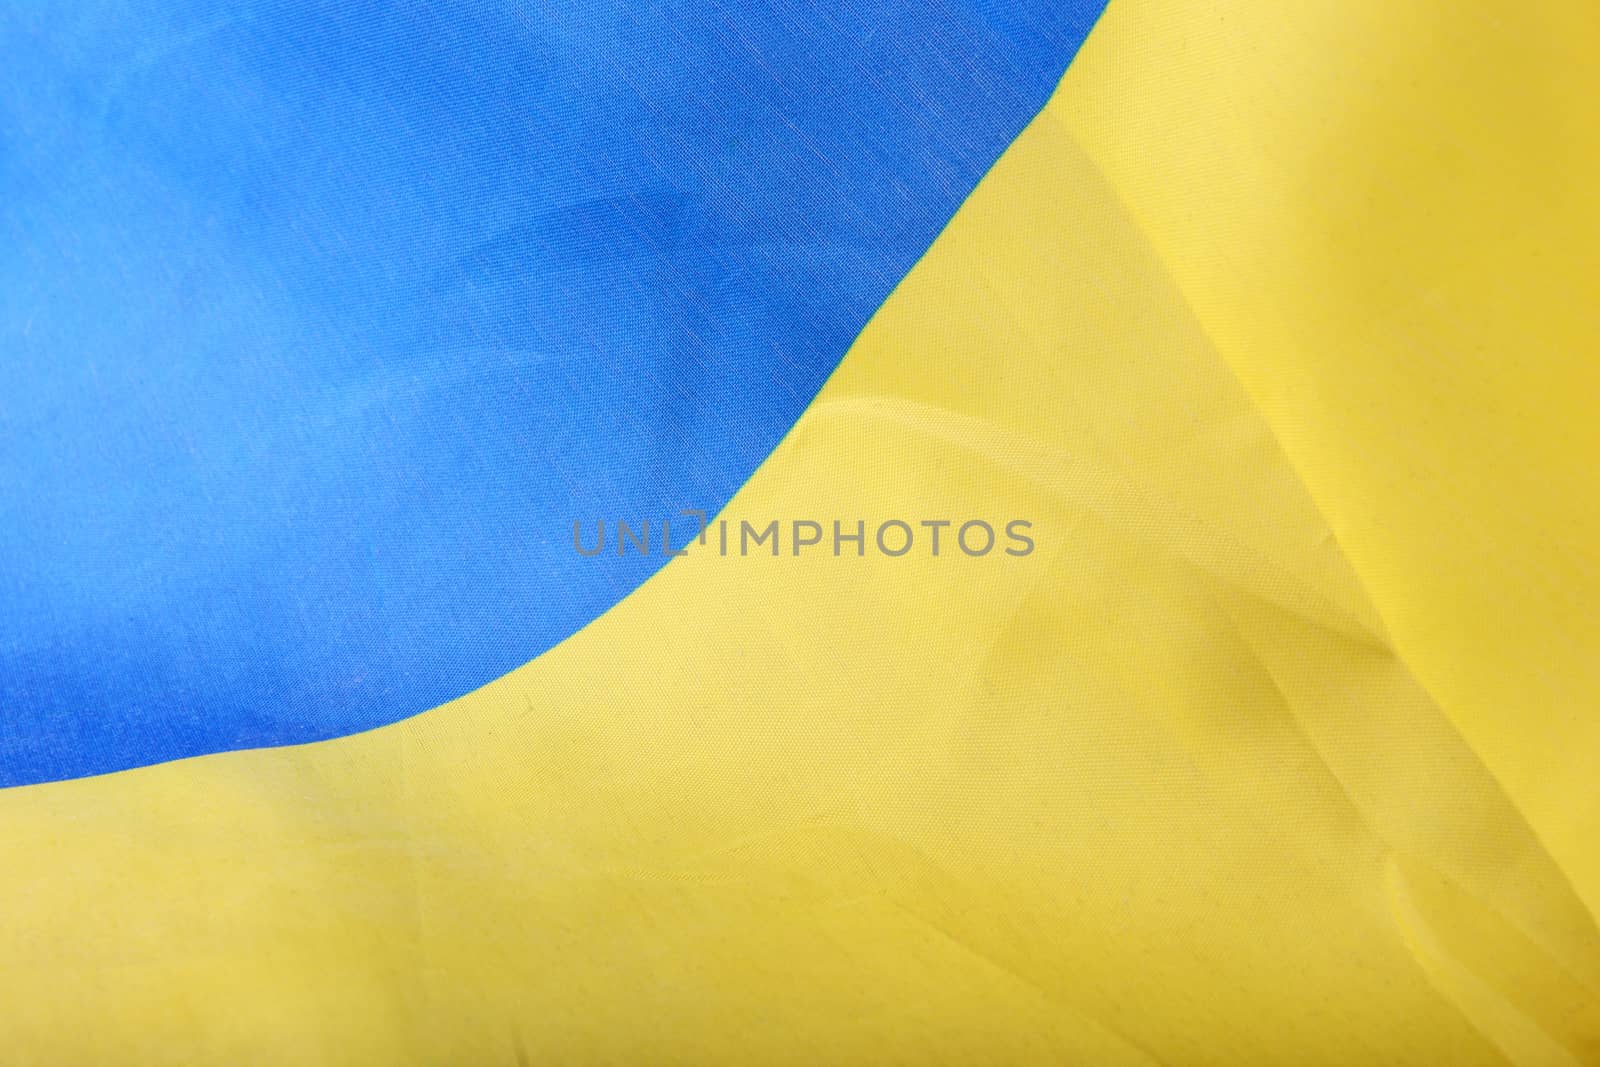 The Flag Of Ukraine Is A Banner Of Two Equally Sized Horizontal Bands Of Blue And Yellow.